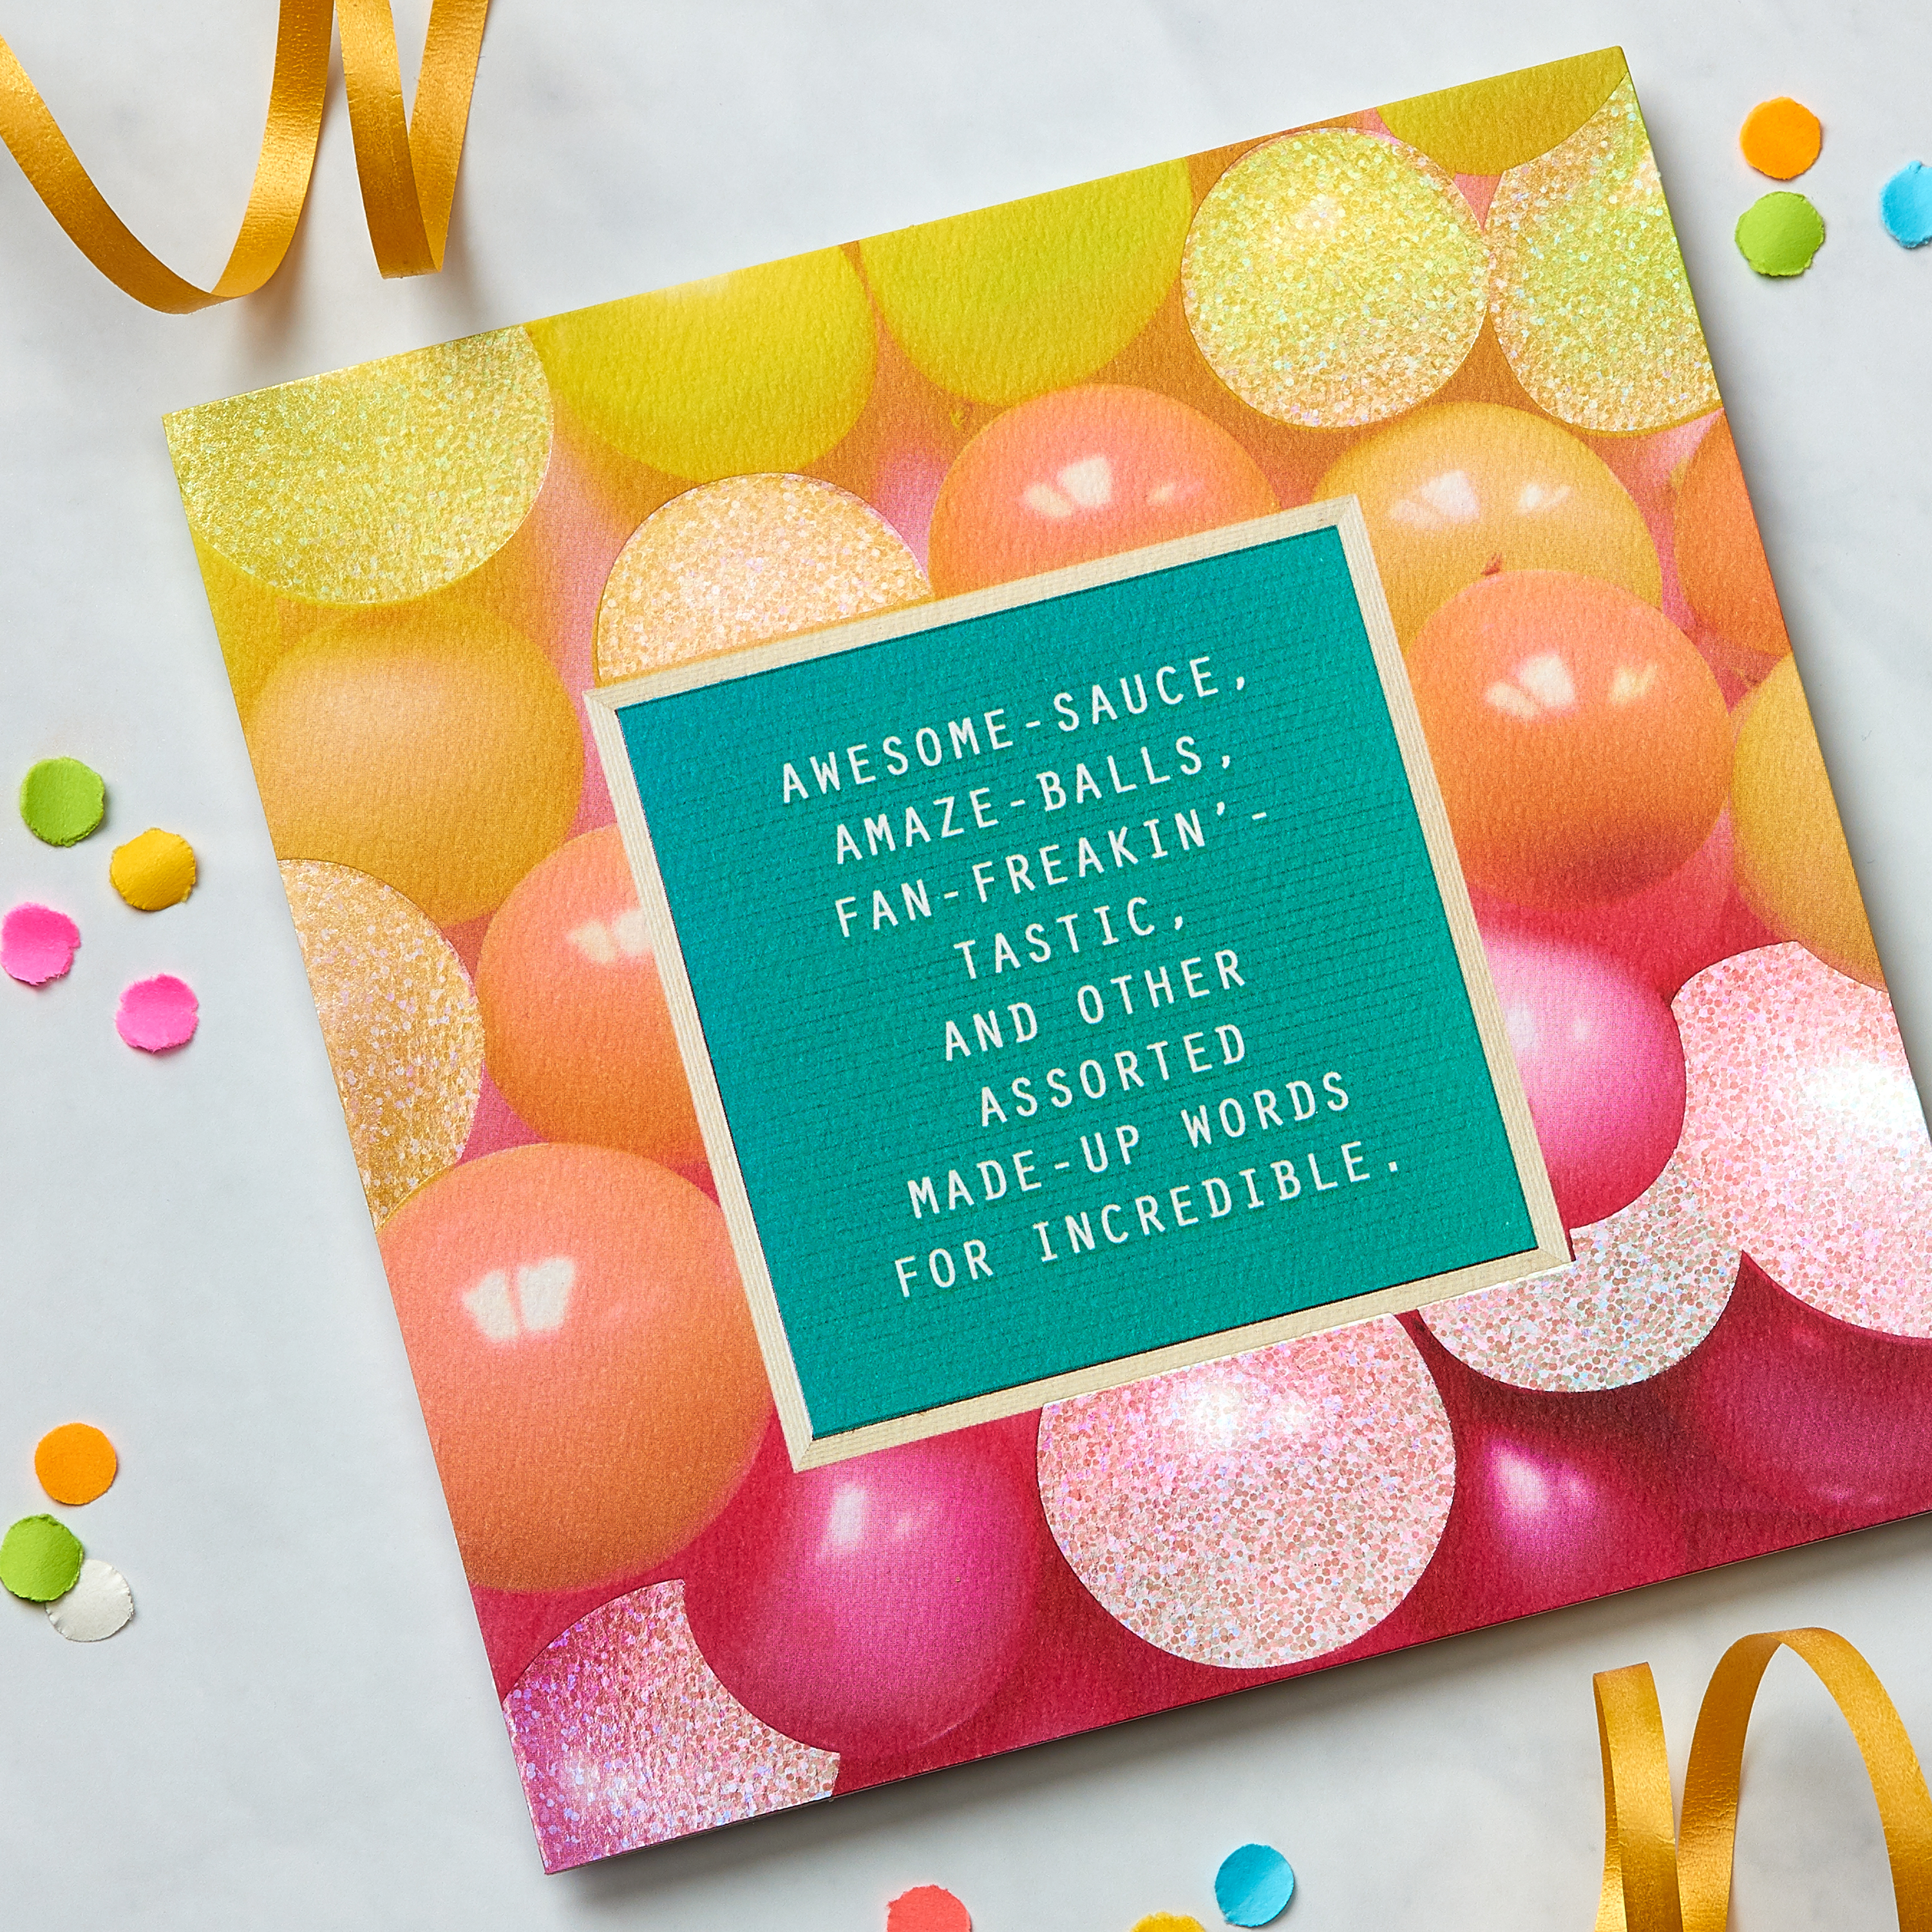 Awesome-Sauce Greeting Card - Congratulations, Graduation, New Job, Promotion, Encouragement image